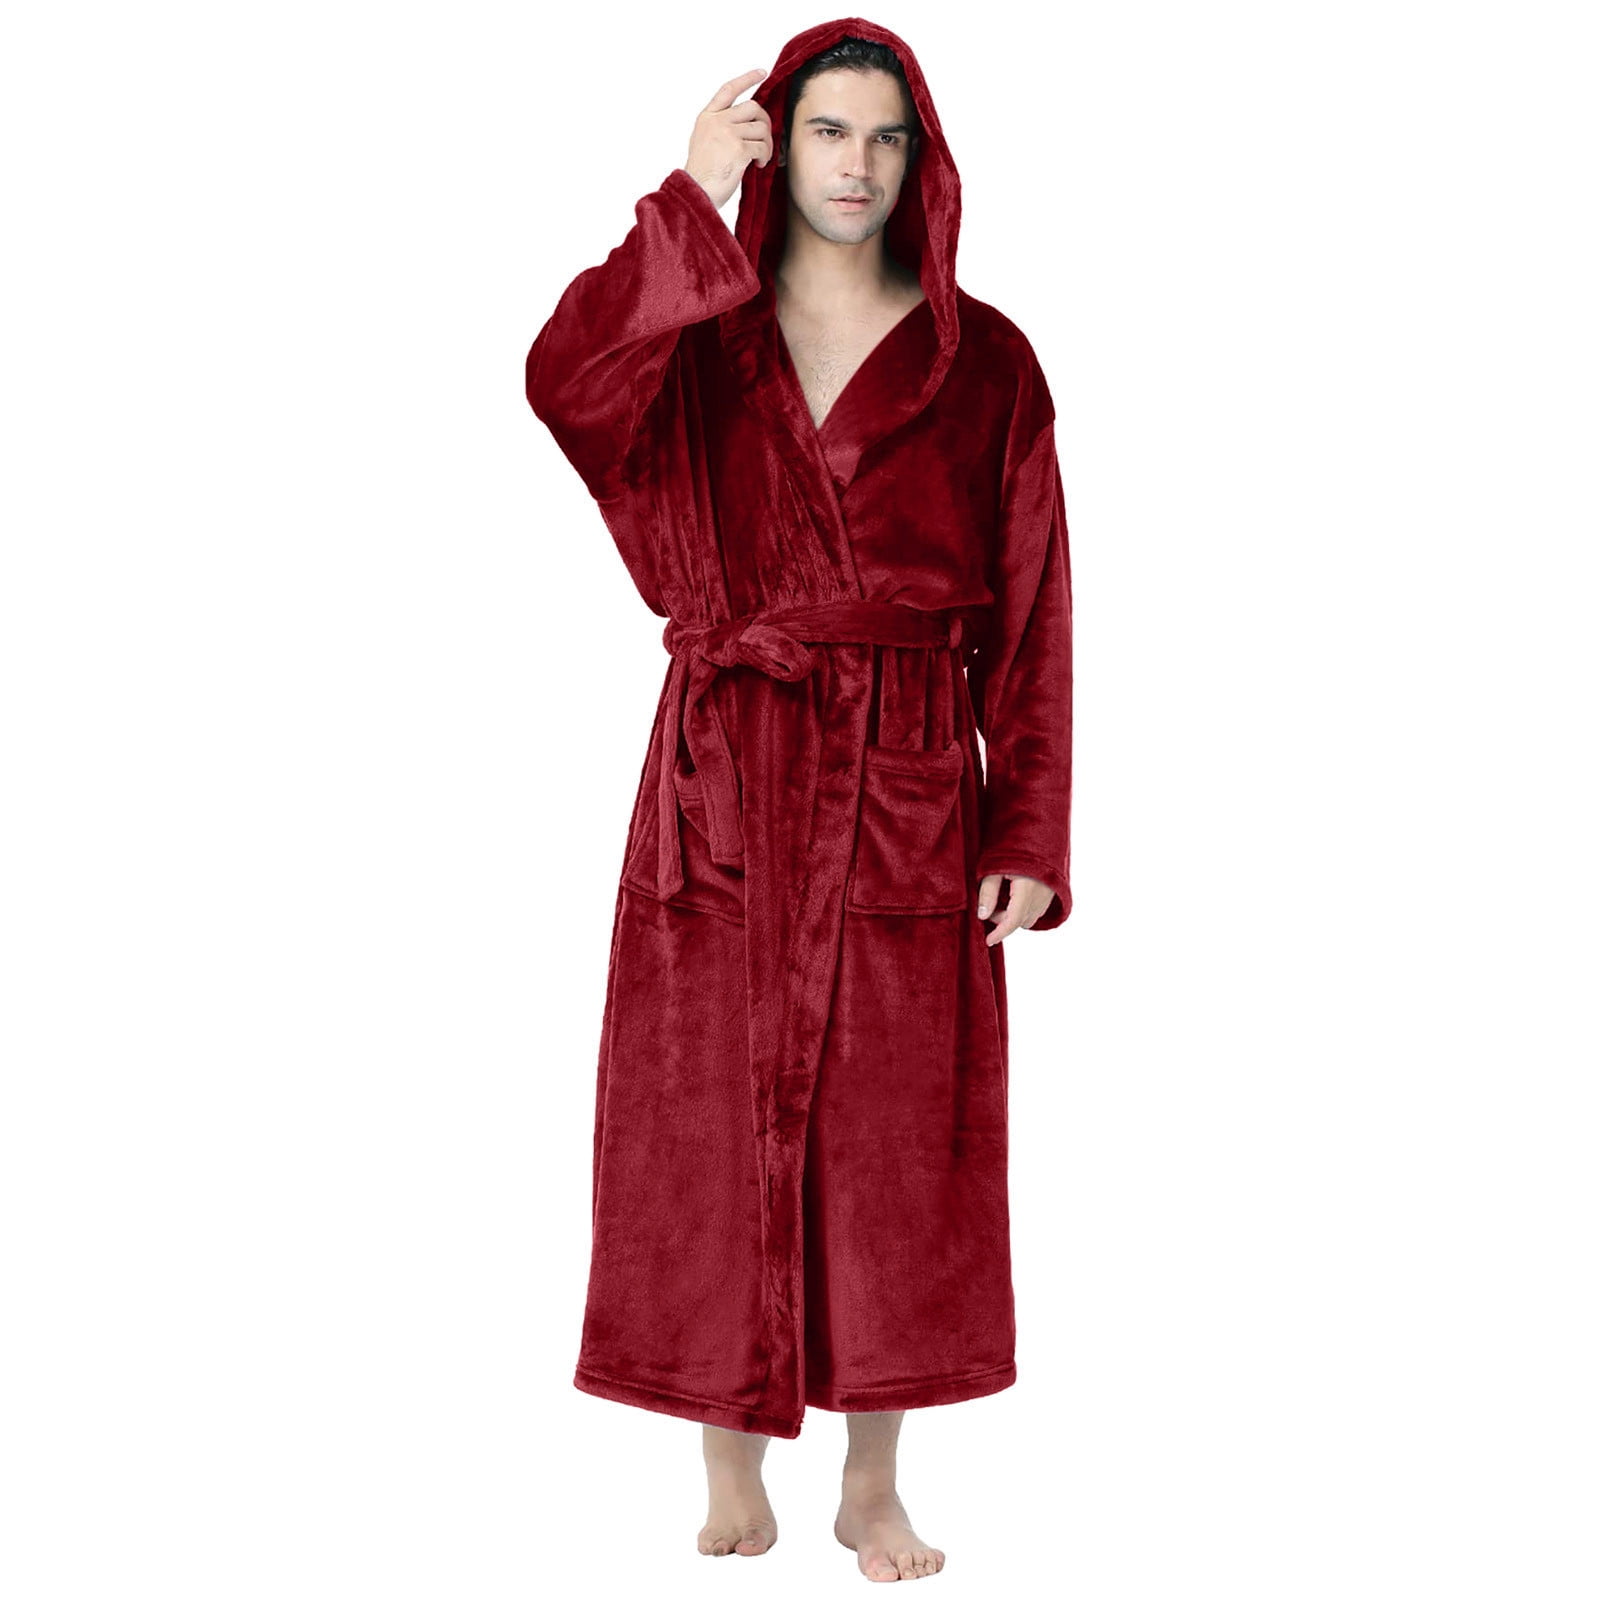 Men's Dressing Gown Sewing Pattern - Luxurious Gift To Make, Size 4XL - 7XL  – Jane Harbison Design